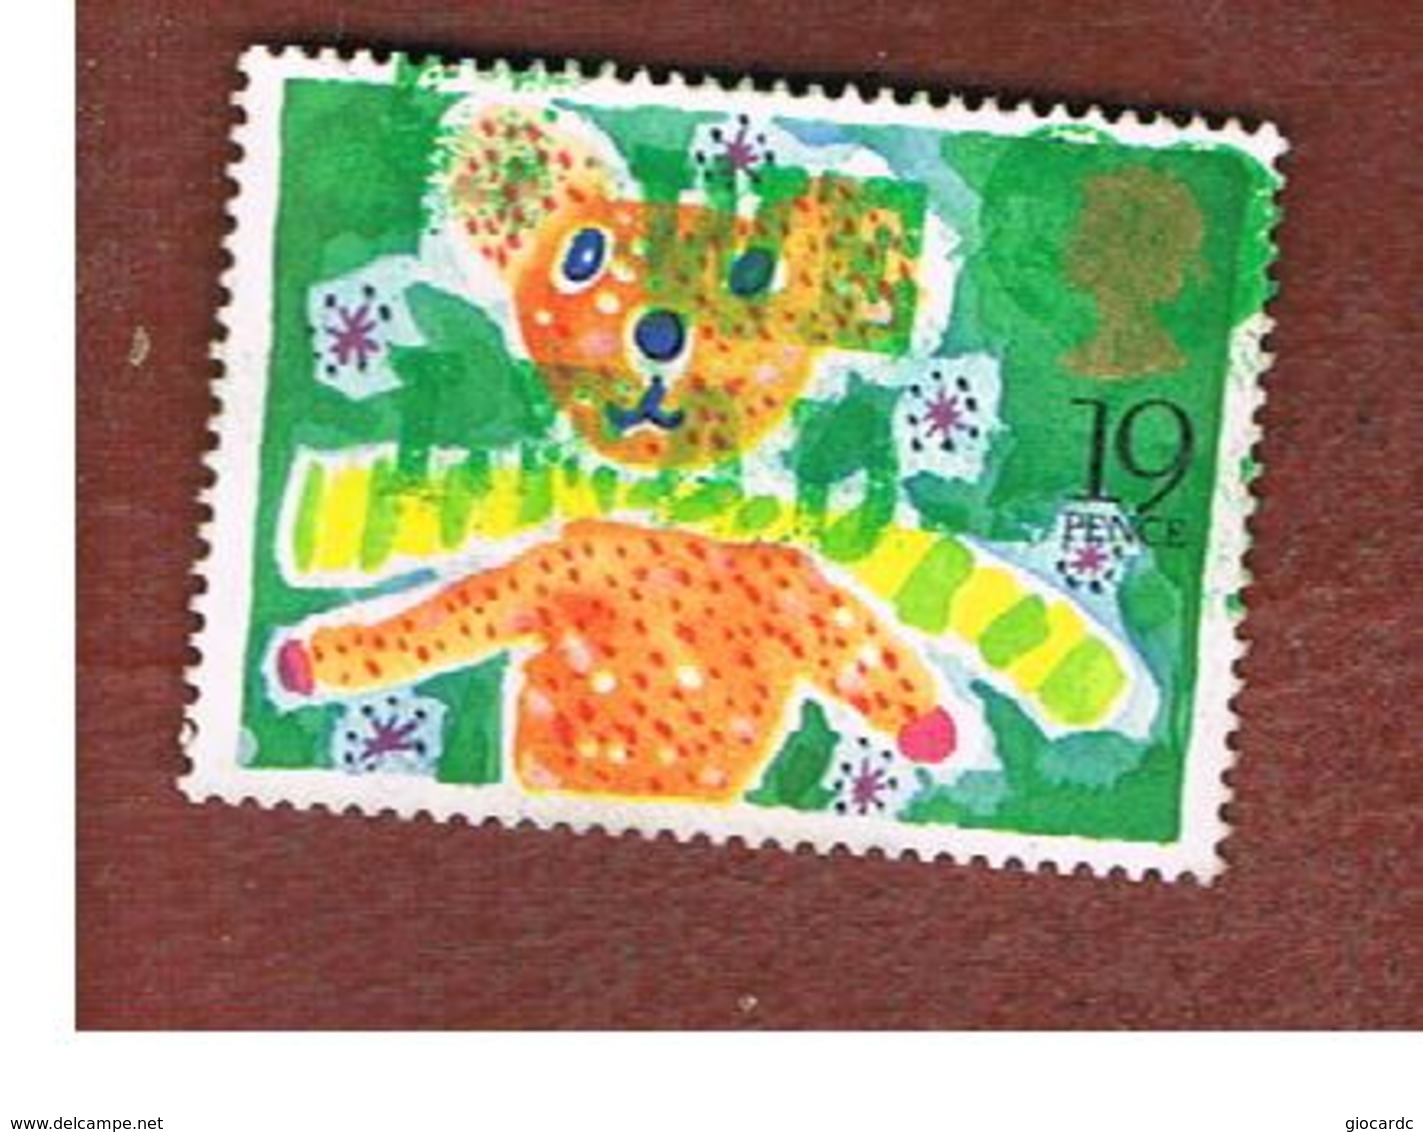 GRAN BRETAGNA (GREAT BRITAIN) - SG 1427 -  1989  GREETINGS STAMPS: TEDDY BEAR  (FROM BOOKLET)  - USED - Used Stamps